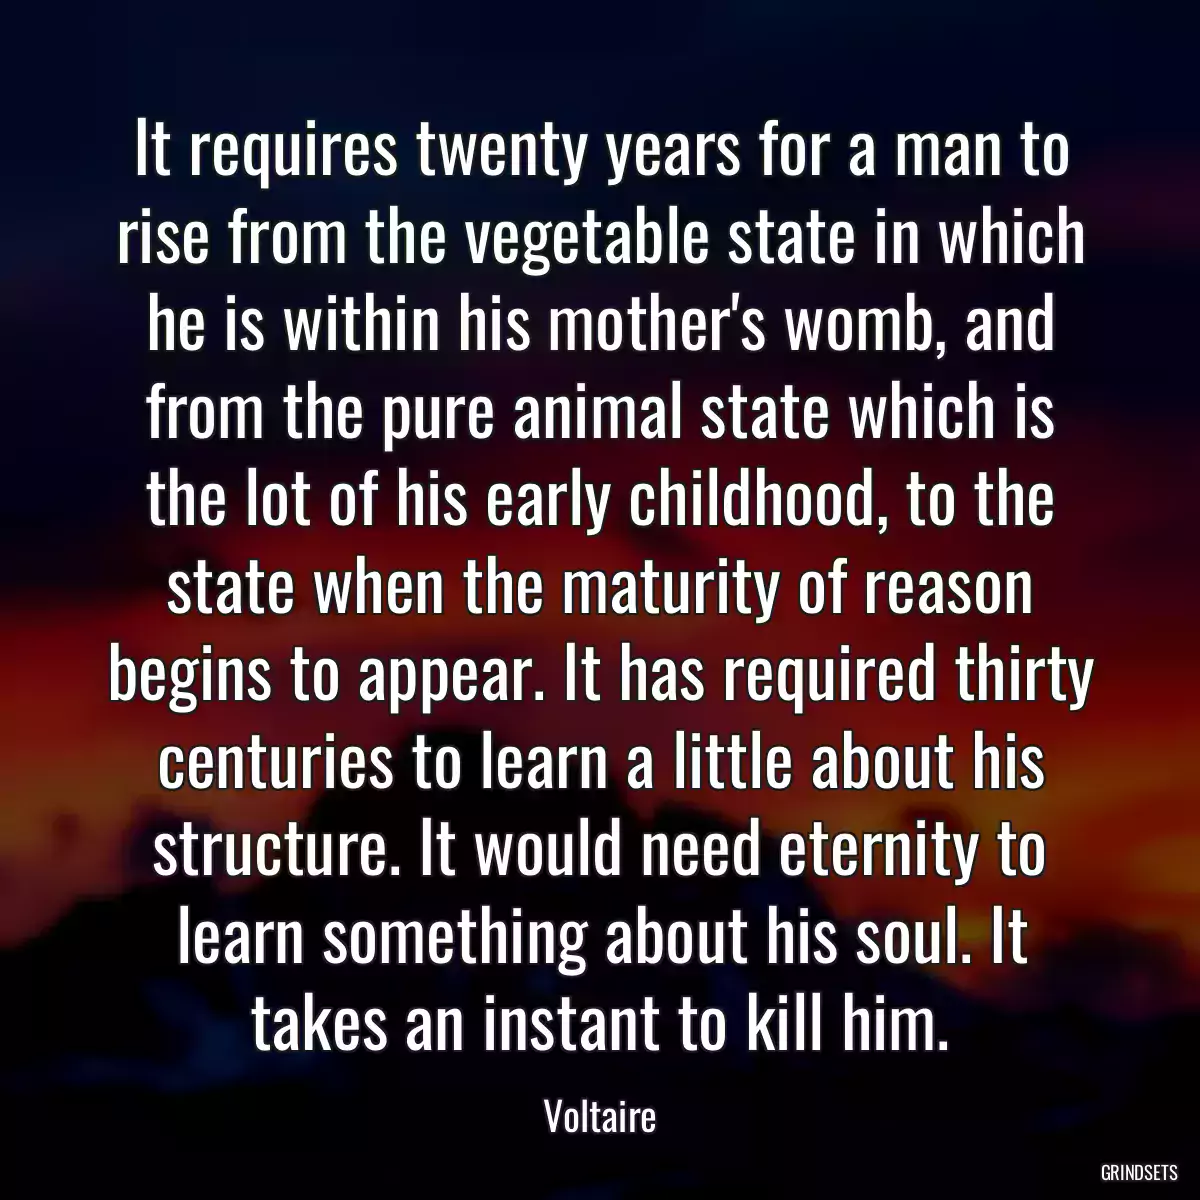 It requires twenty years for a man to rise from the vegetable state in which he is within his mother\'s womb, and from the pure animal state which is the lot of his early childhood, to the state when the maturity of reason begins to appear. It has required thirty centuries to learn a little about his structure. It would need eternity to learn something about his soul. It takes an instant to kill him.